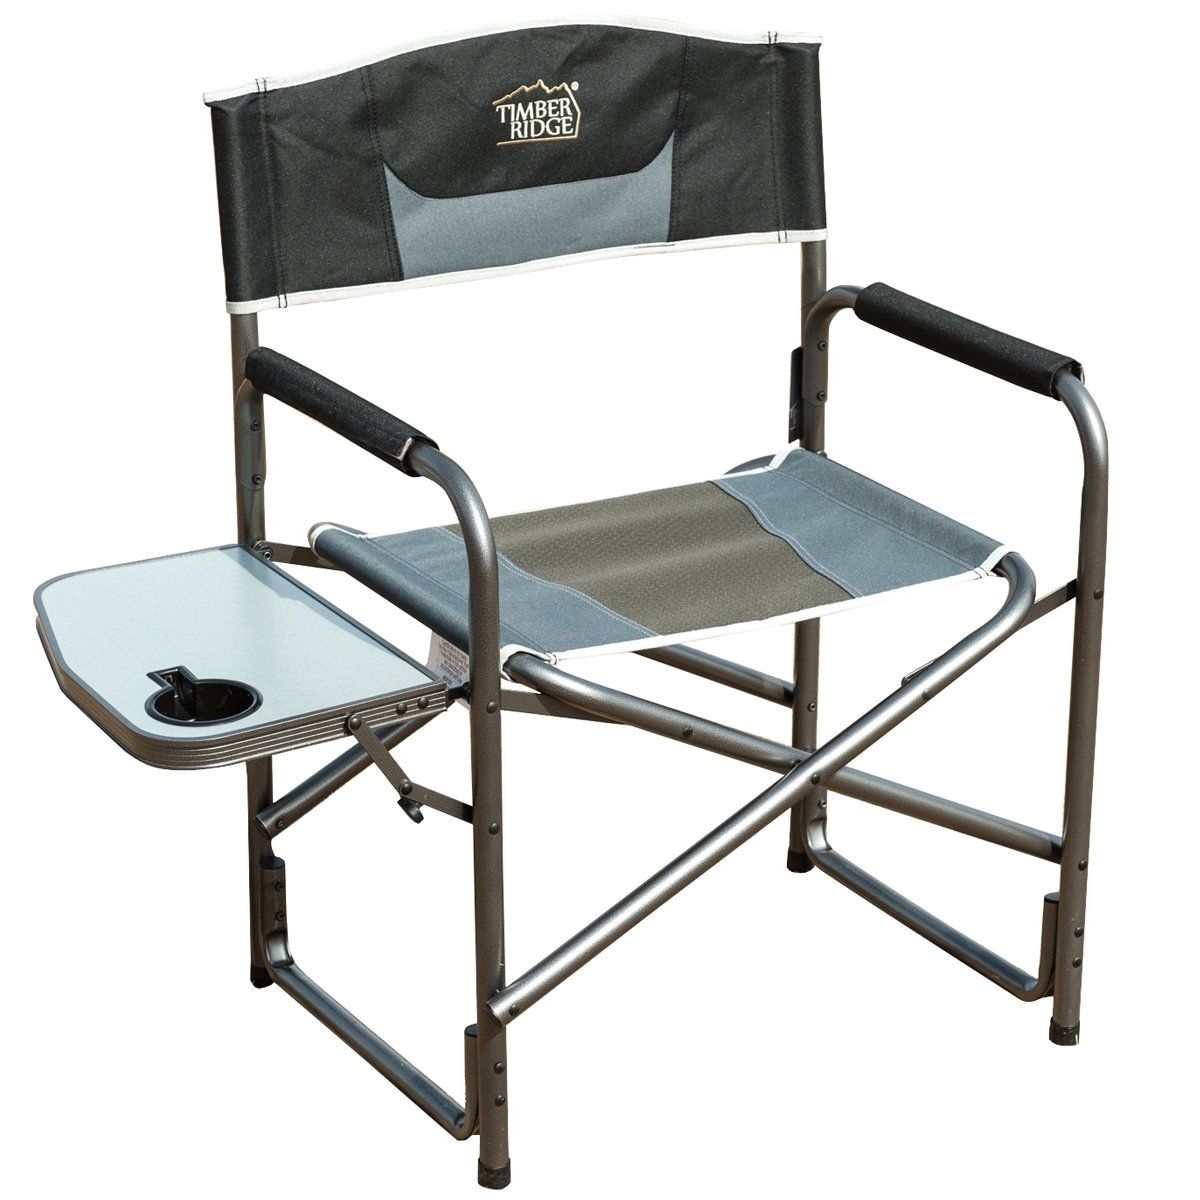 Folding Tall Directors Chair with Side Table Timber Ridge Aluminum Portable Director S Folding Chair with Side